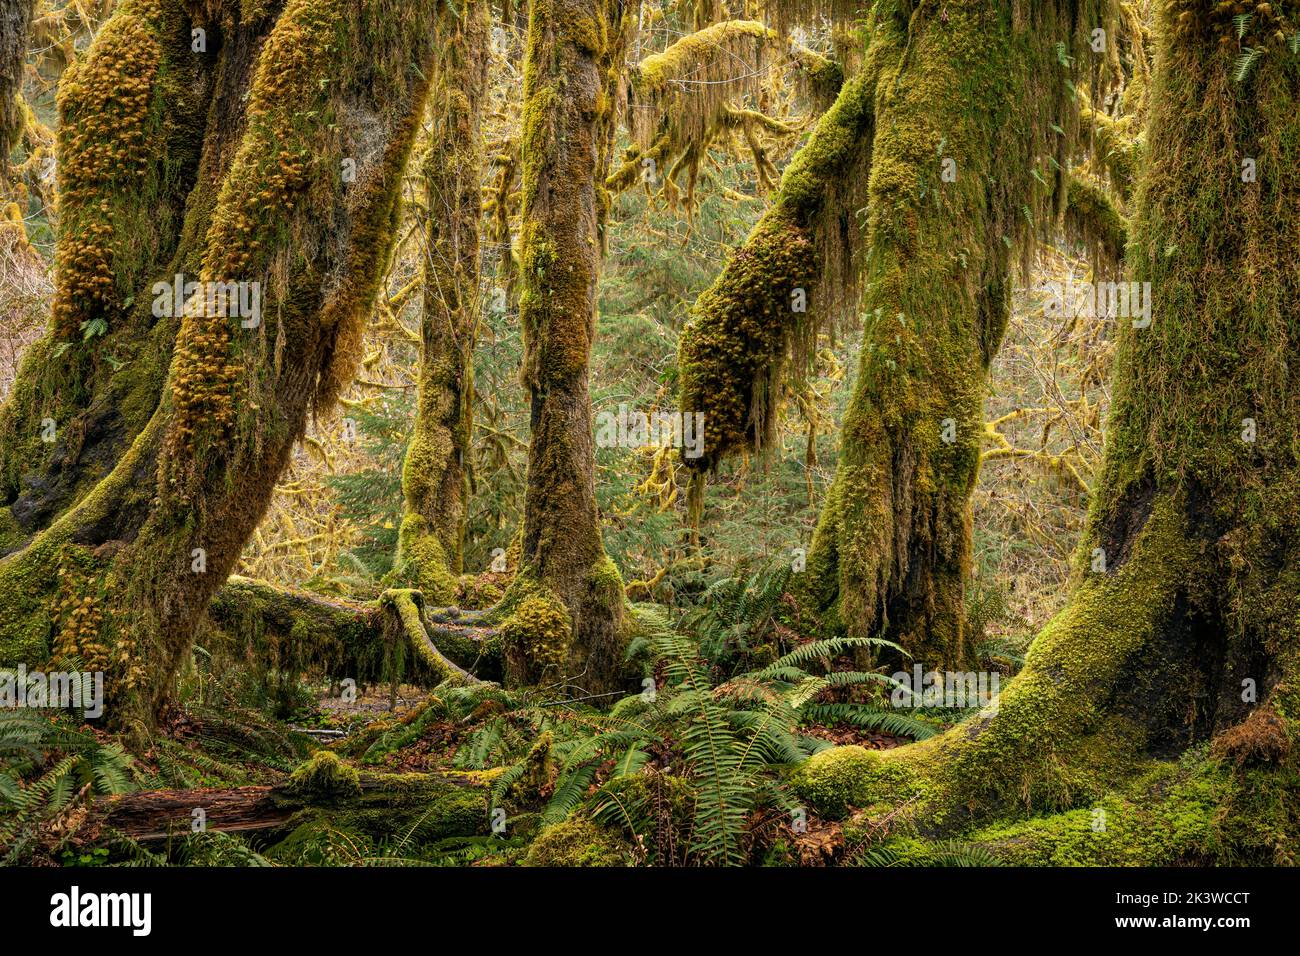 WA22105-00...WASHINGTON - Moss covered Big Leaf Maple trees and an understory of Western Sword Ferns viewed in the Hall of Mosses, Olympic National Pa Stock Photo